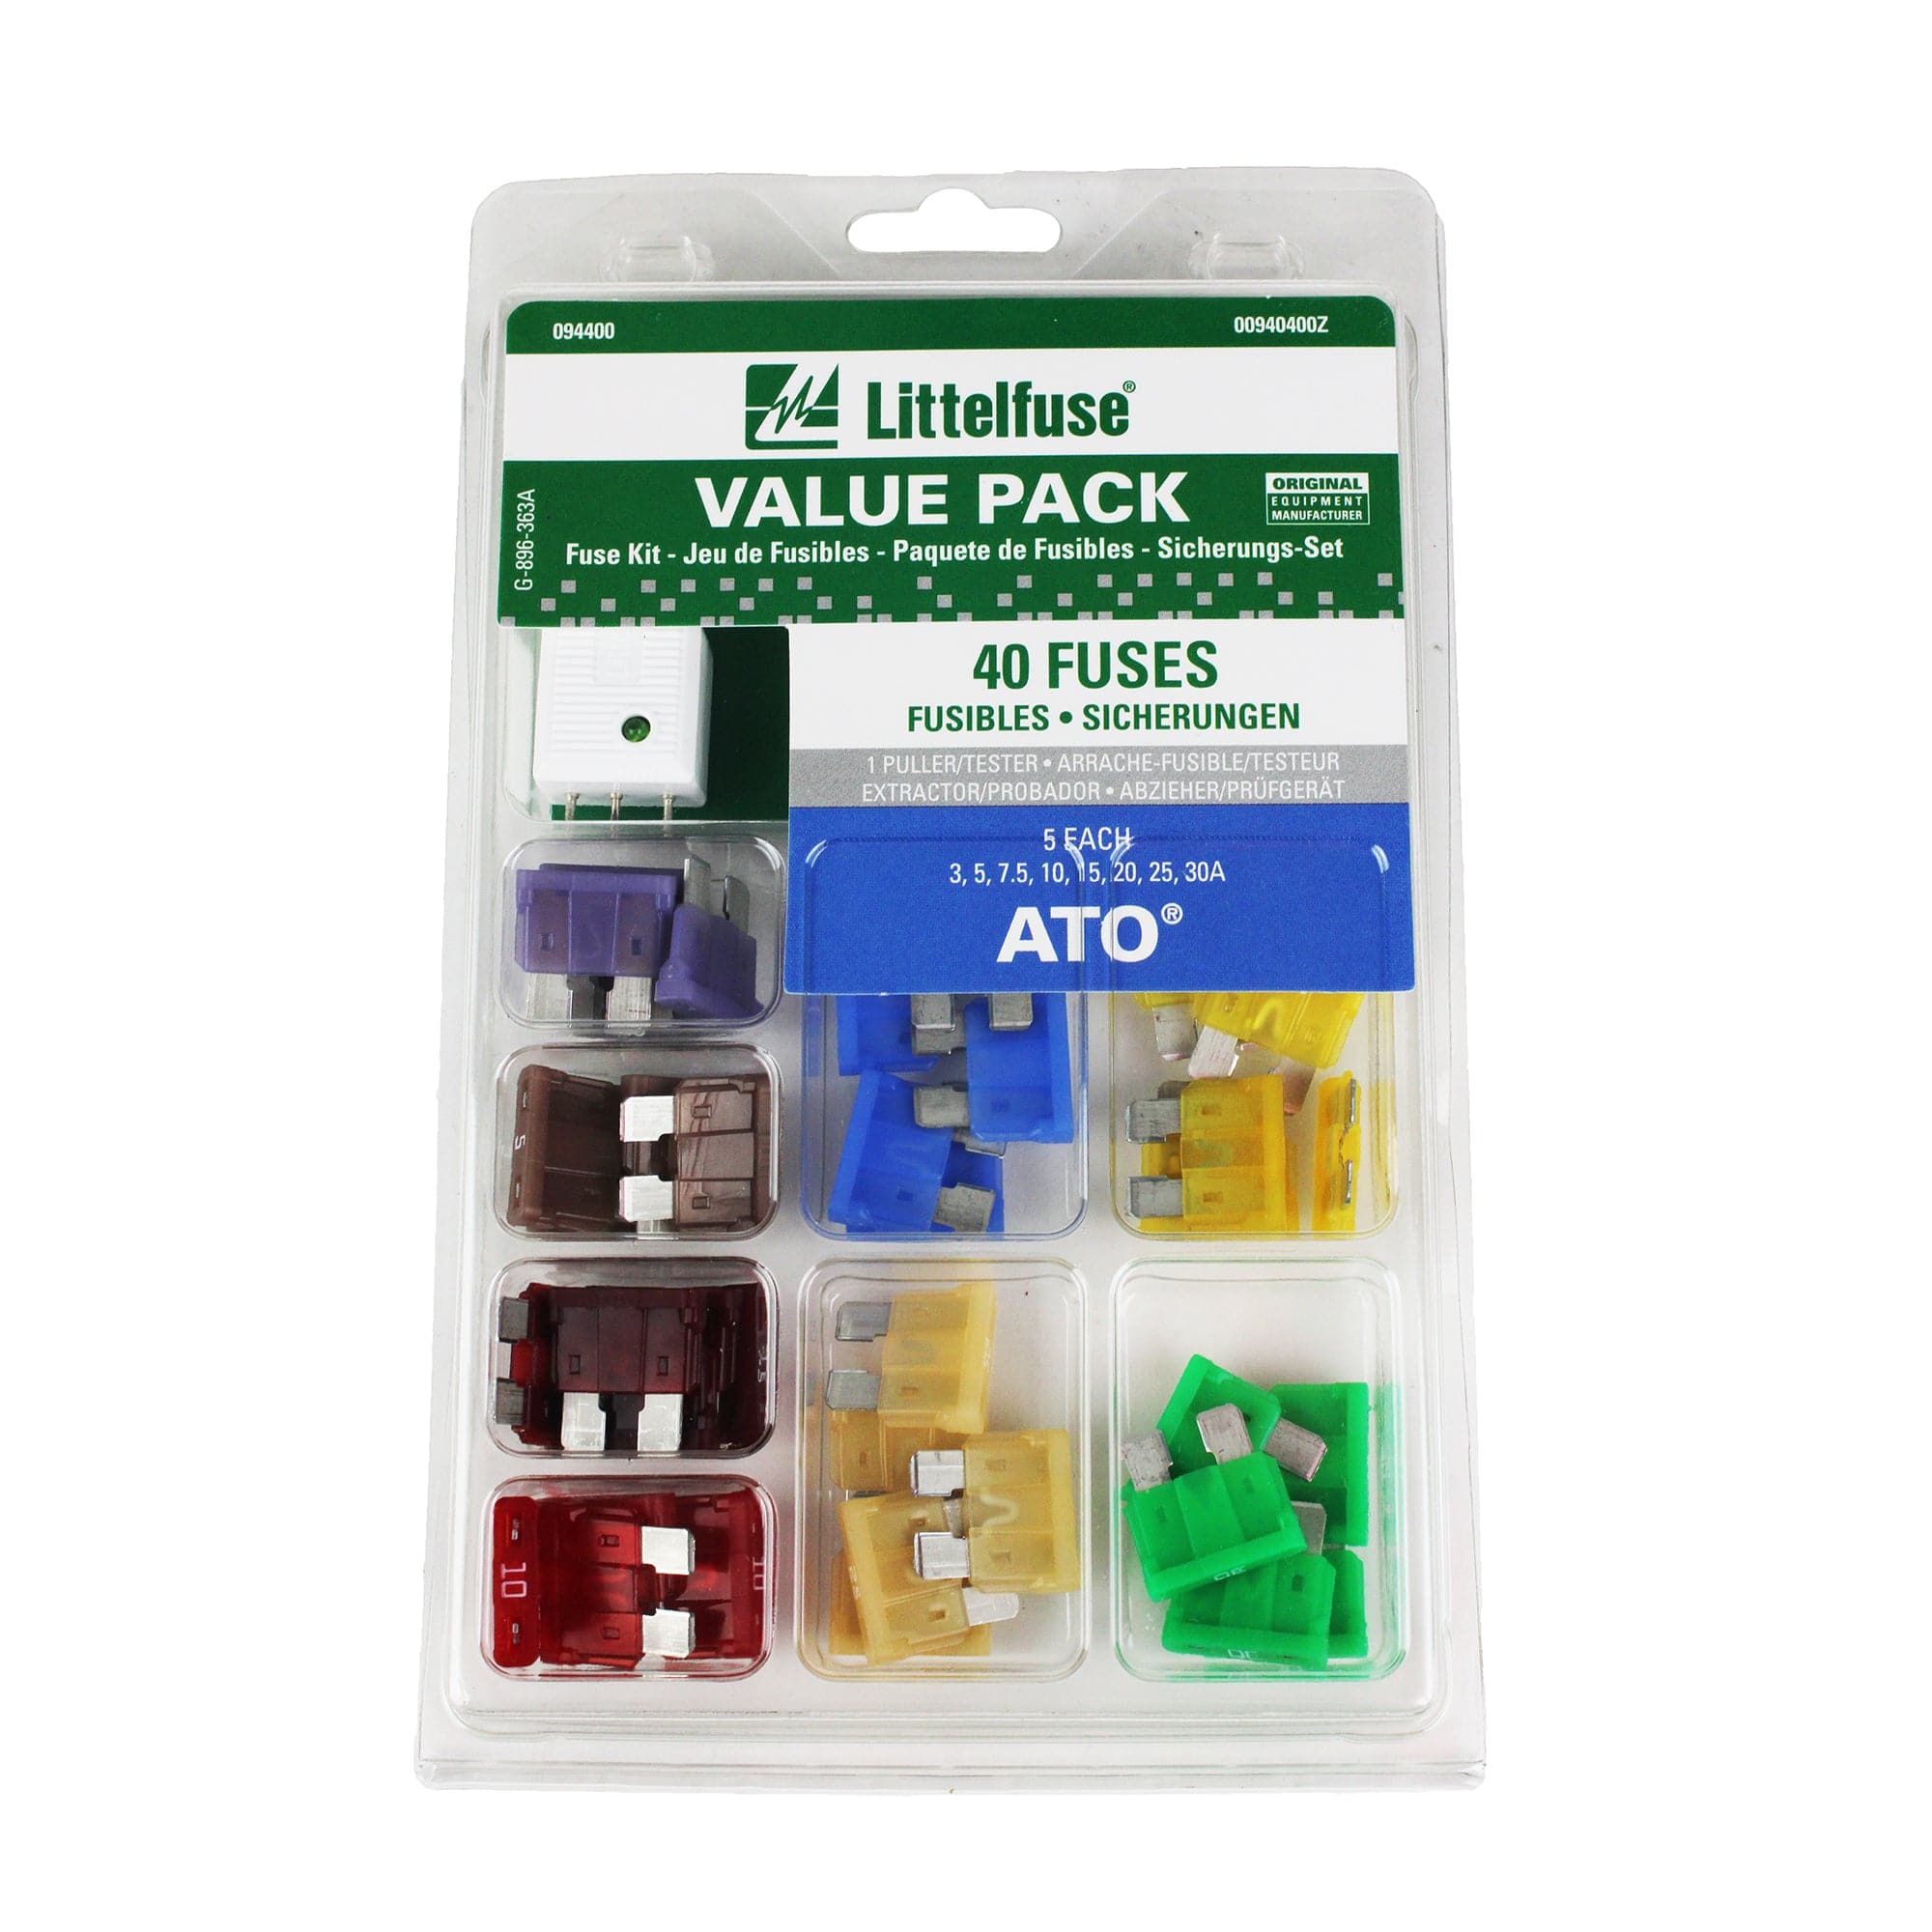 Littelfuse 00940400Z ATO Fuse Assortment, 5A-30A - 40 Pack